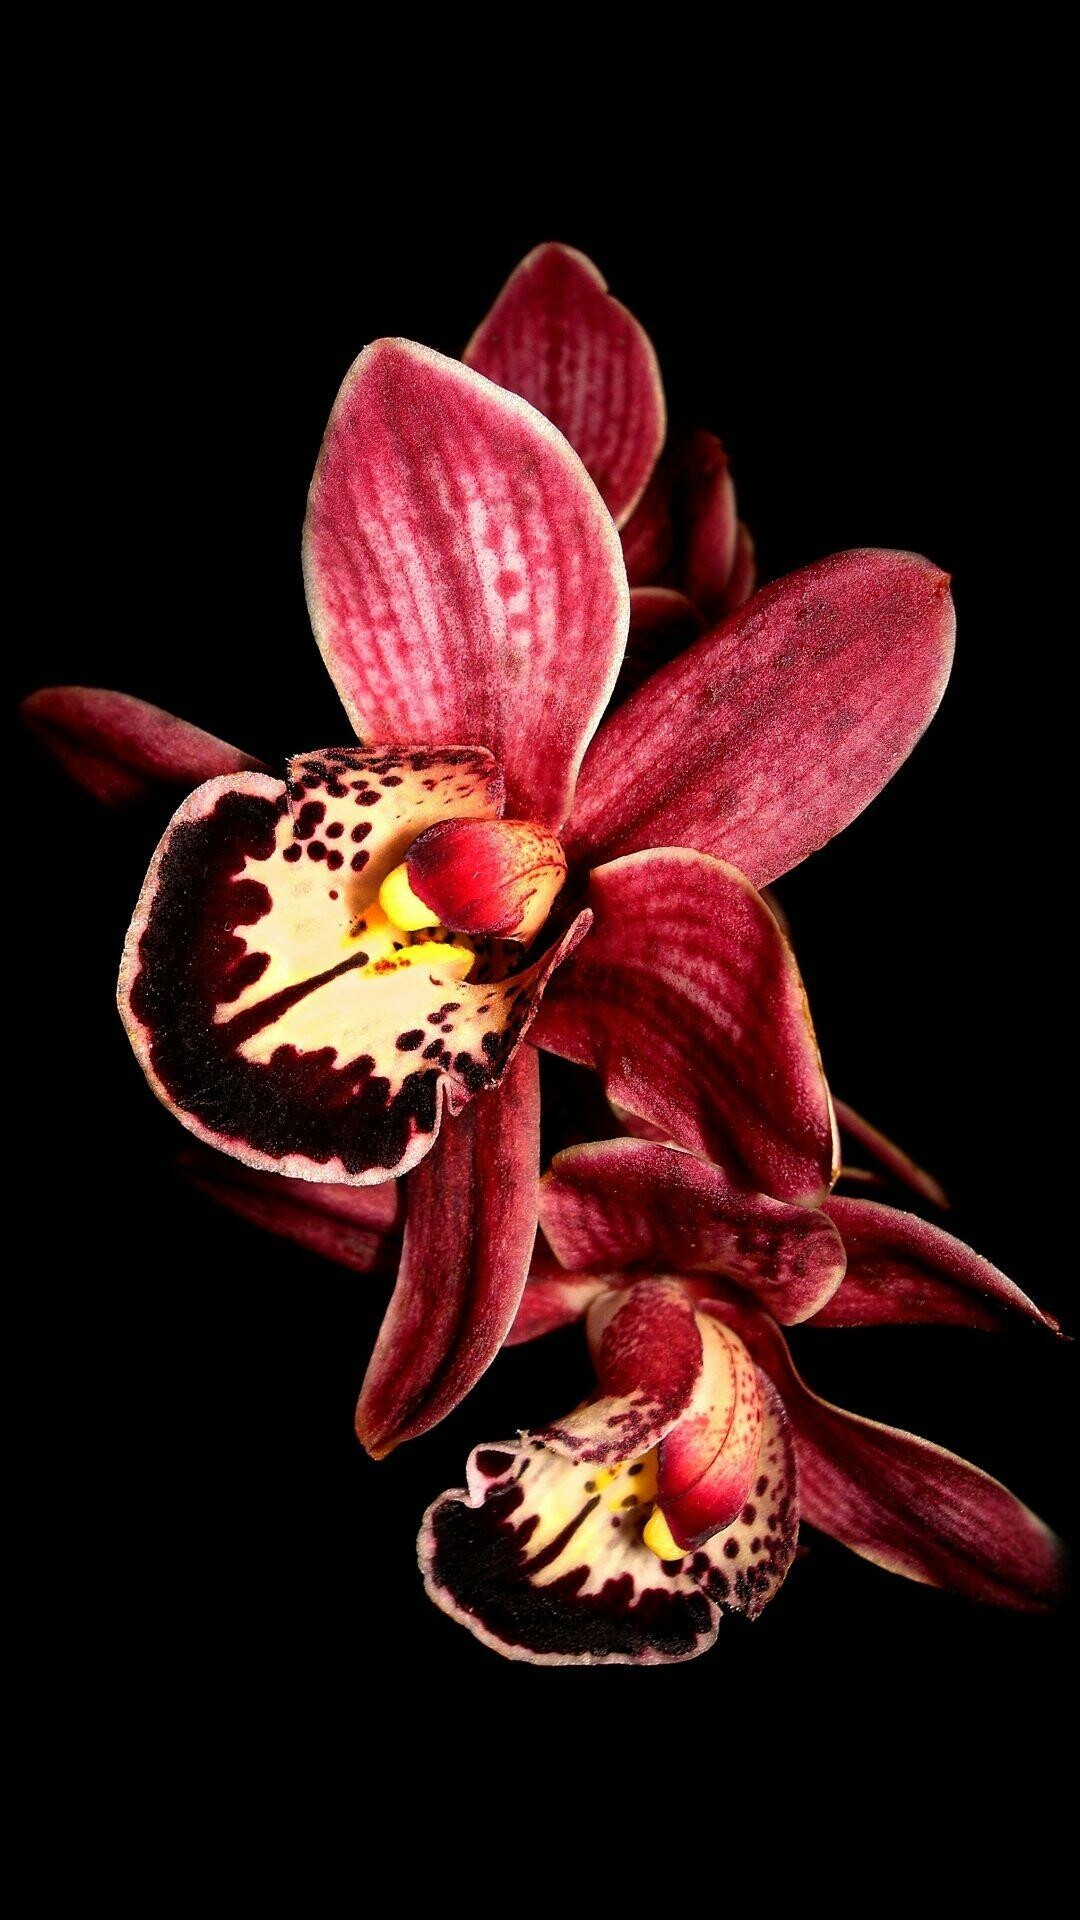 Orchid: A plant bearing unusually-shaped flowers of beautiful colors. 1080x1920 Full HD Wallpaper.